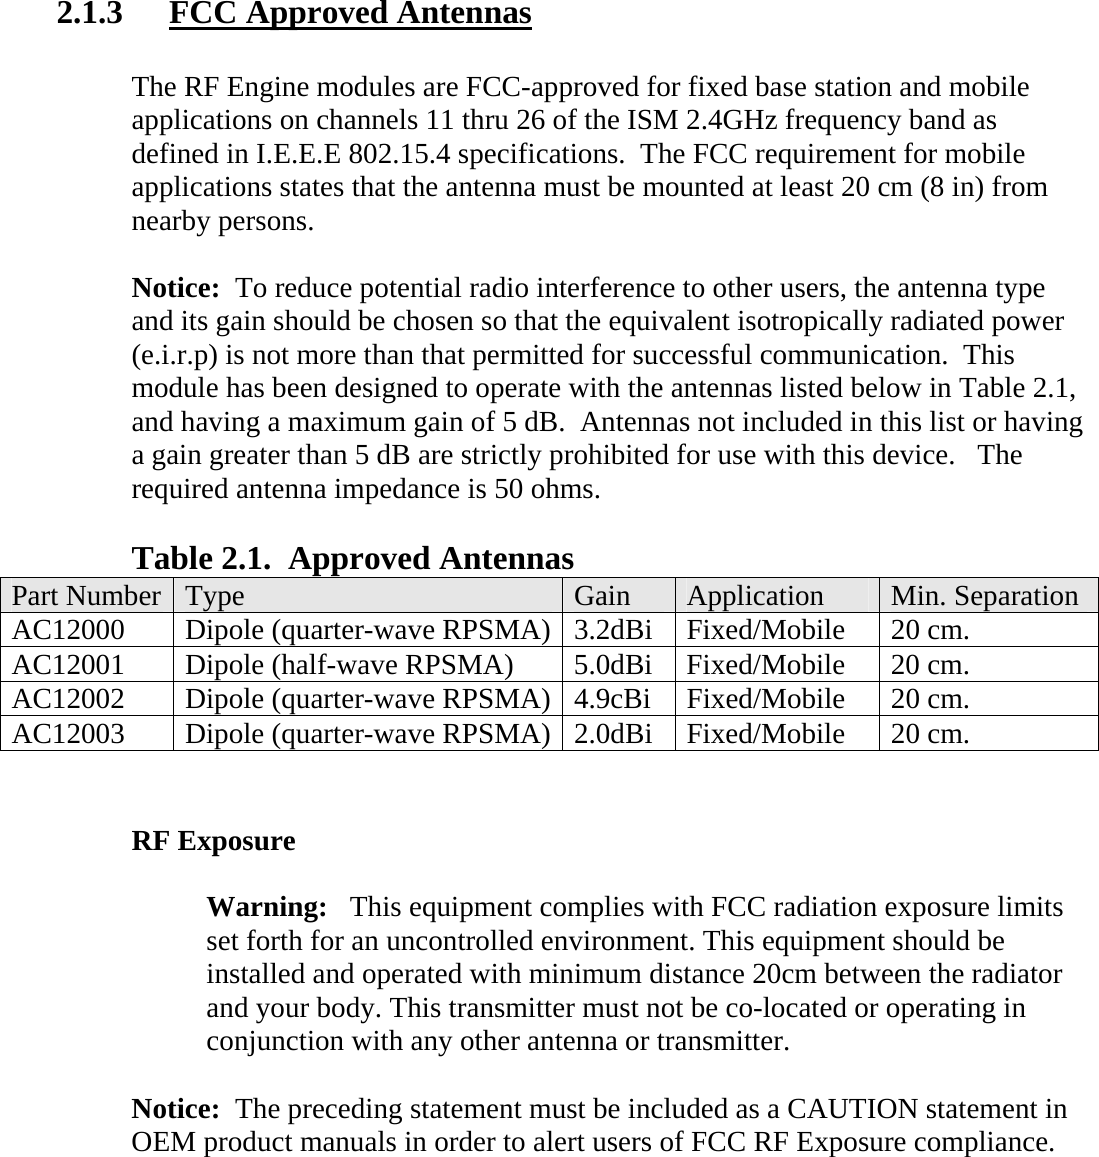  2.1.3  FCC Approved Antennas  The RF Engine modules are FCC-approved for fixed base station and mobile applications on channels 11 thru 26 of the ISM 2.4GHz frequency band as defined in I.E.E.E 802.15.4 specifications.  The FCC requirement for mobile applications states that the antenna must be mounted at least 20 cm (8 in) from nearby persons.    Notice:  To reduce potential radio interference to other users, the antenna type and its gain should be chosen so that the equivalent isotropically radiated power (e.i.r.p) is not more than that permitted for successful communication.  This module has been designed to operate with the antennas listed below in Table 2.1, and having a maximum gain of 5 dB.  Antennas not included in this list or having a gain greater than 5 dB are strictly prohibited for use with this device.   The required antenna impedance is 50 ohms.  Table 2.1.  Approved Antennas Part Number  Type   Gain  Application  Min. Separation AC12000  Dipole (quarter-wave RPSMA) 3.2dBi Fixed/Mobile  20 cm. AC12001  Dipole (half-wave RPSMA)  5.0dBi  Fixed/Mobile  20 cm. AC12002  Dipole (quarter-wave RPSMA) 4.9cBi Fixed/Mobile  20 cm. AC12003  Dipole (quarter-wave RPSMA) 2.0dBi Fixed/Mobile  20 cm.   RF Exposure  Warning:   This equipment complies with FCC radiation exposure limits set forth for an uncontrolled environment. This equipment should be installed and operated with minimum distance 20cm between the radiator and your body. This transmitter must not be co-located or operating in conjunction with any other antenna or transmitter.  Notice:  The preceding statement must be included as a CAUTION statement in OEM product manuals in order to alert users of FCC RF Exposure compliance.   